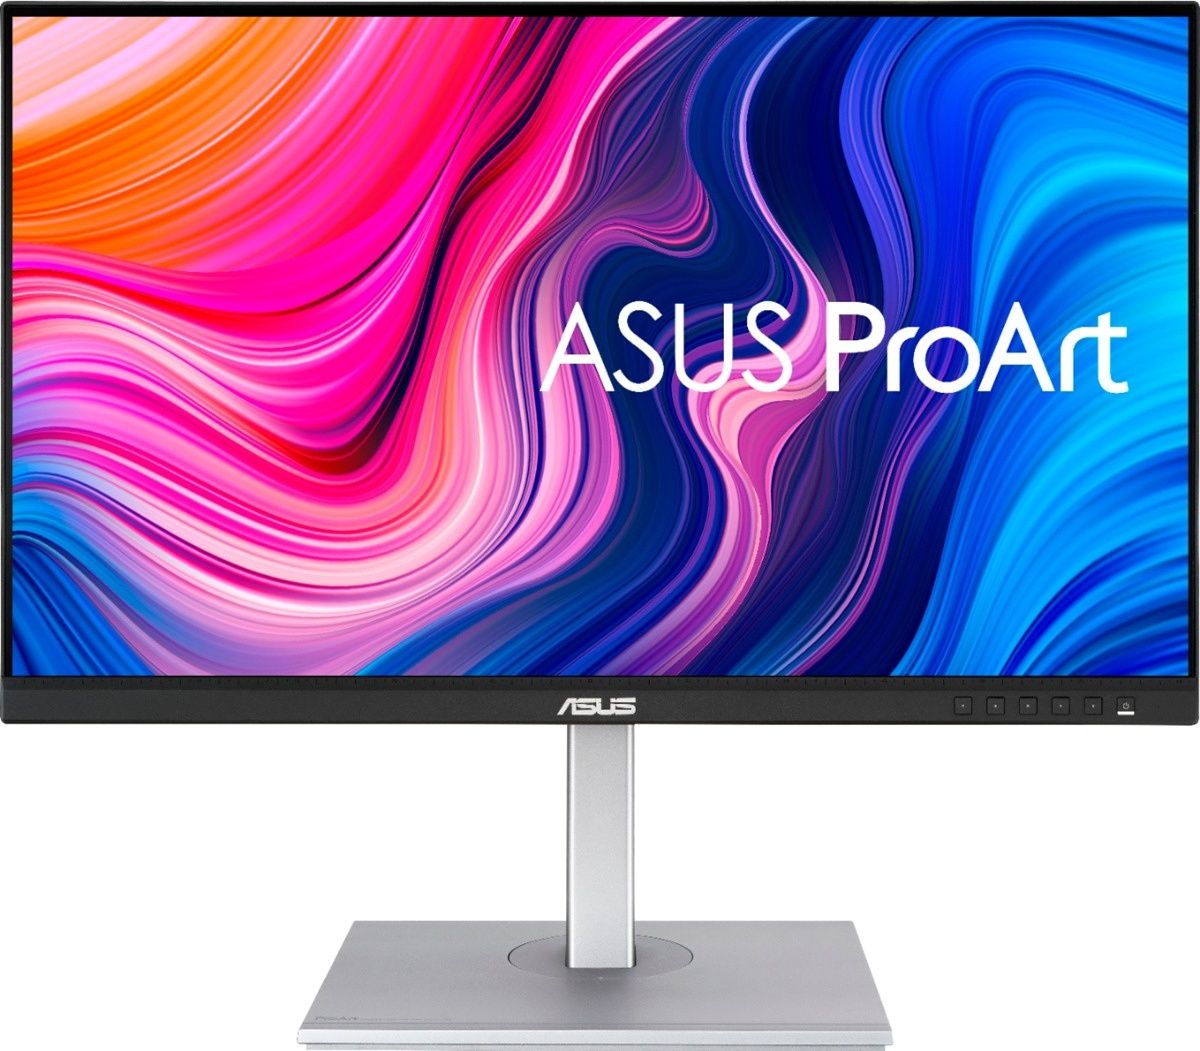 If you need to work on color-sensitive projects including video, photo, and other digital art, this ASUS ProArt monitor is the one for you. It covers 100% of sRGB and Rec. 709 color gamuts, it has a Delta E < 2, and it's verified by CalMAN for color accuracy. It supports USB-C, HDMI, and DisplayPort, so you can connect in any way you want.